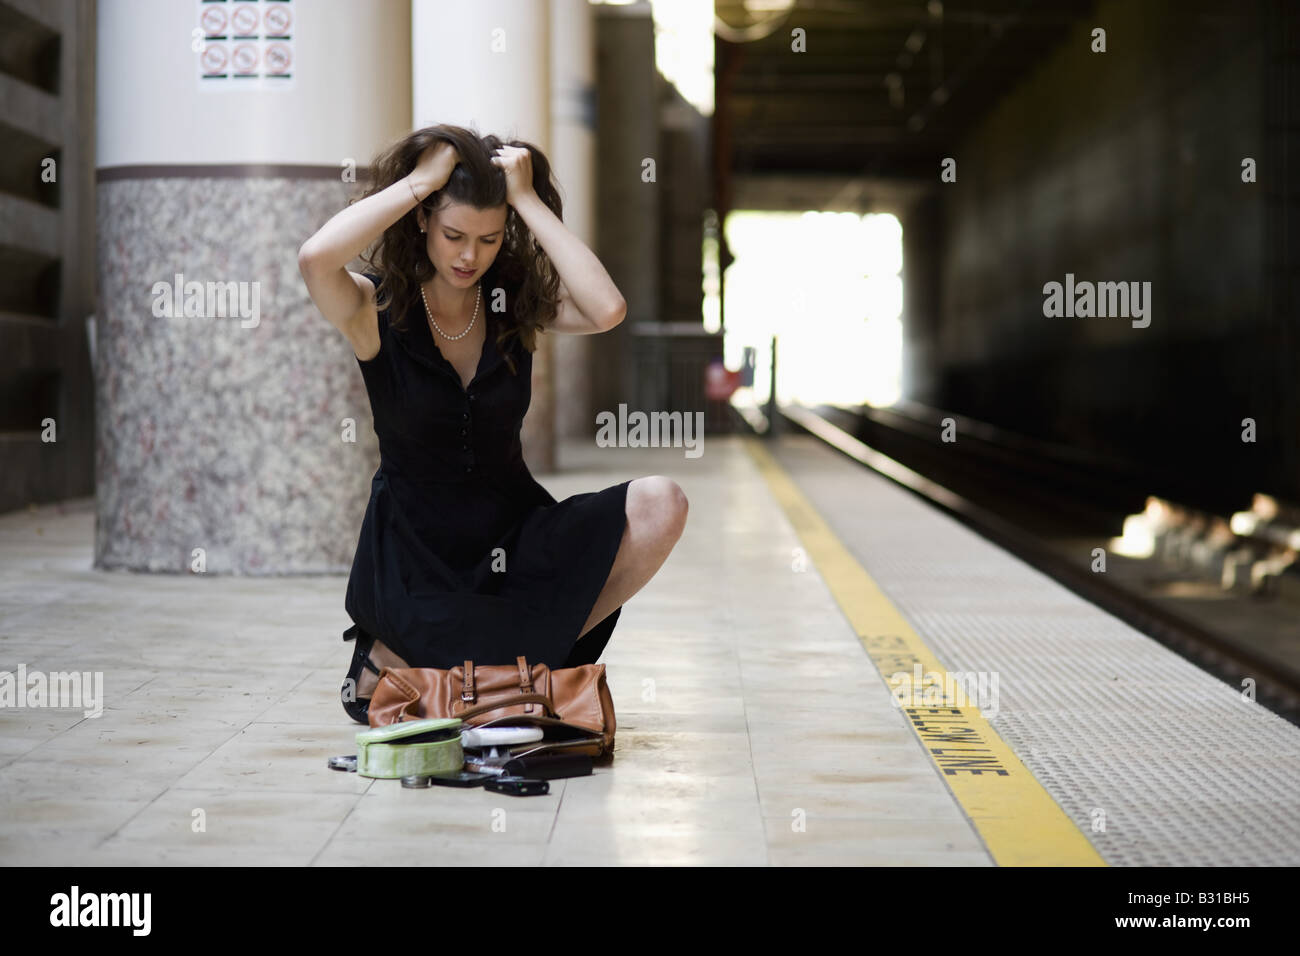 Young woman picking up spilled personal items from the floor Stock Photo